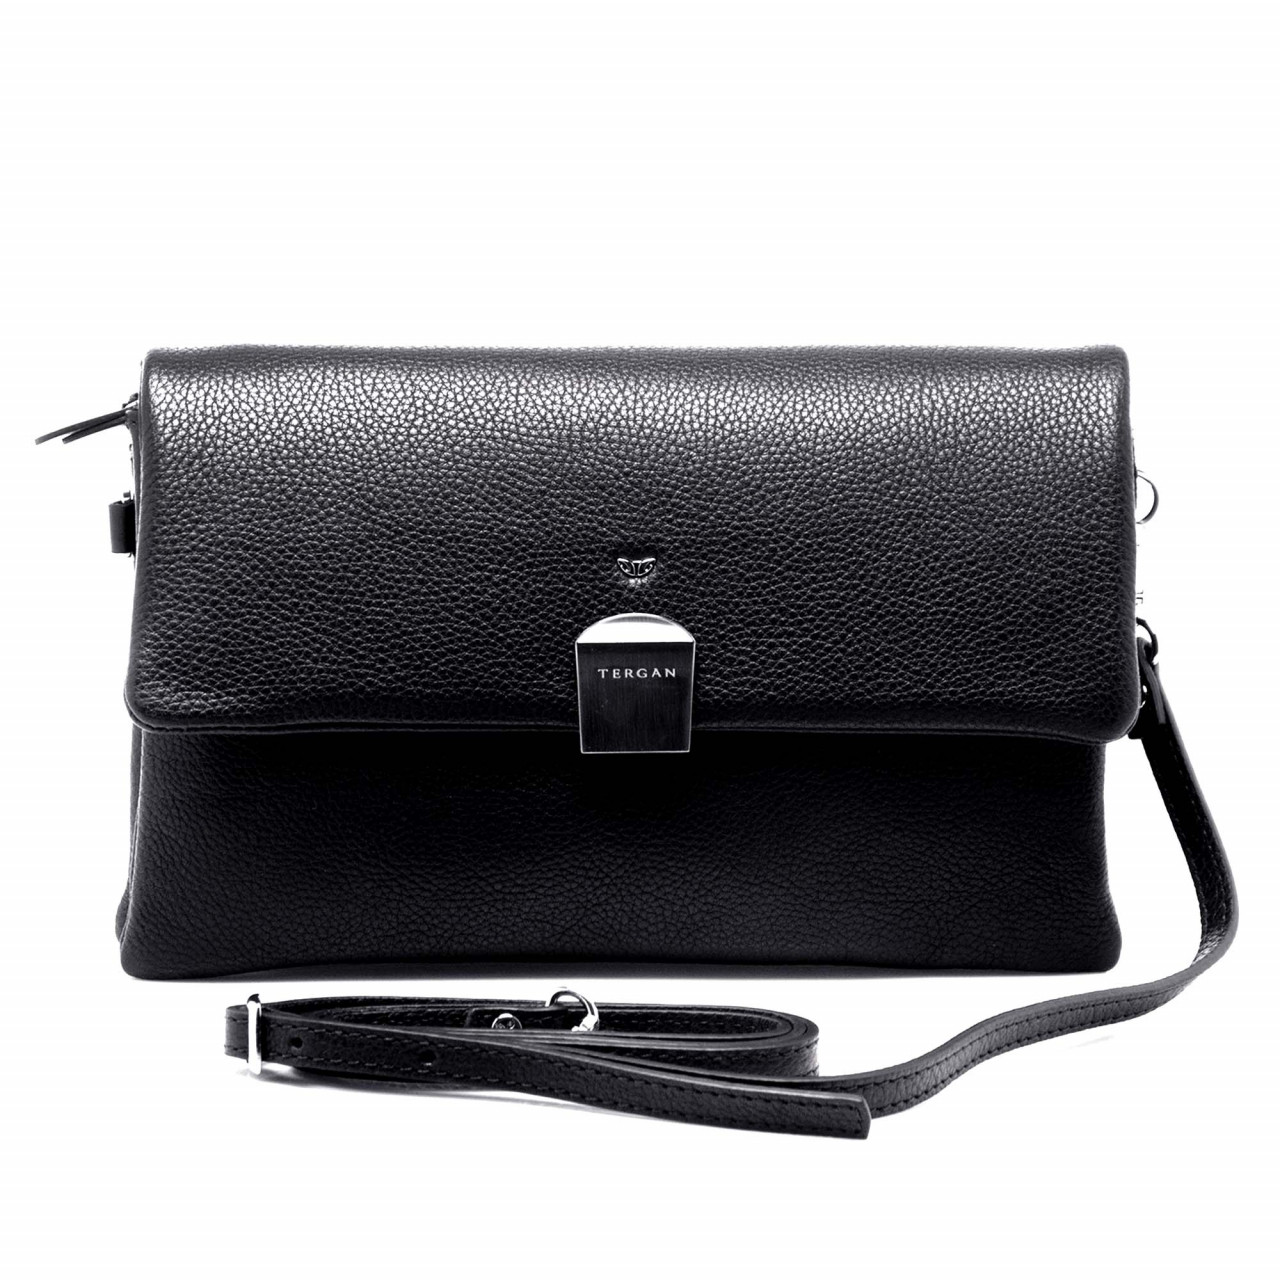 Men's handbag made of genuine leather with a long handle